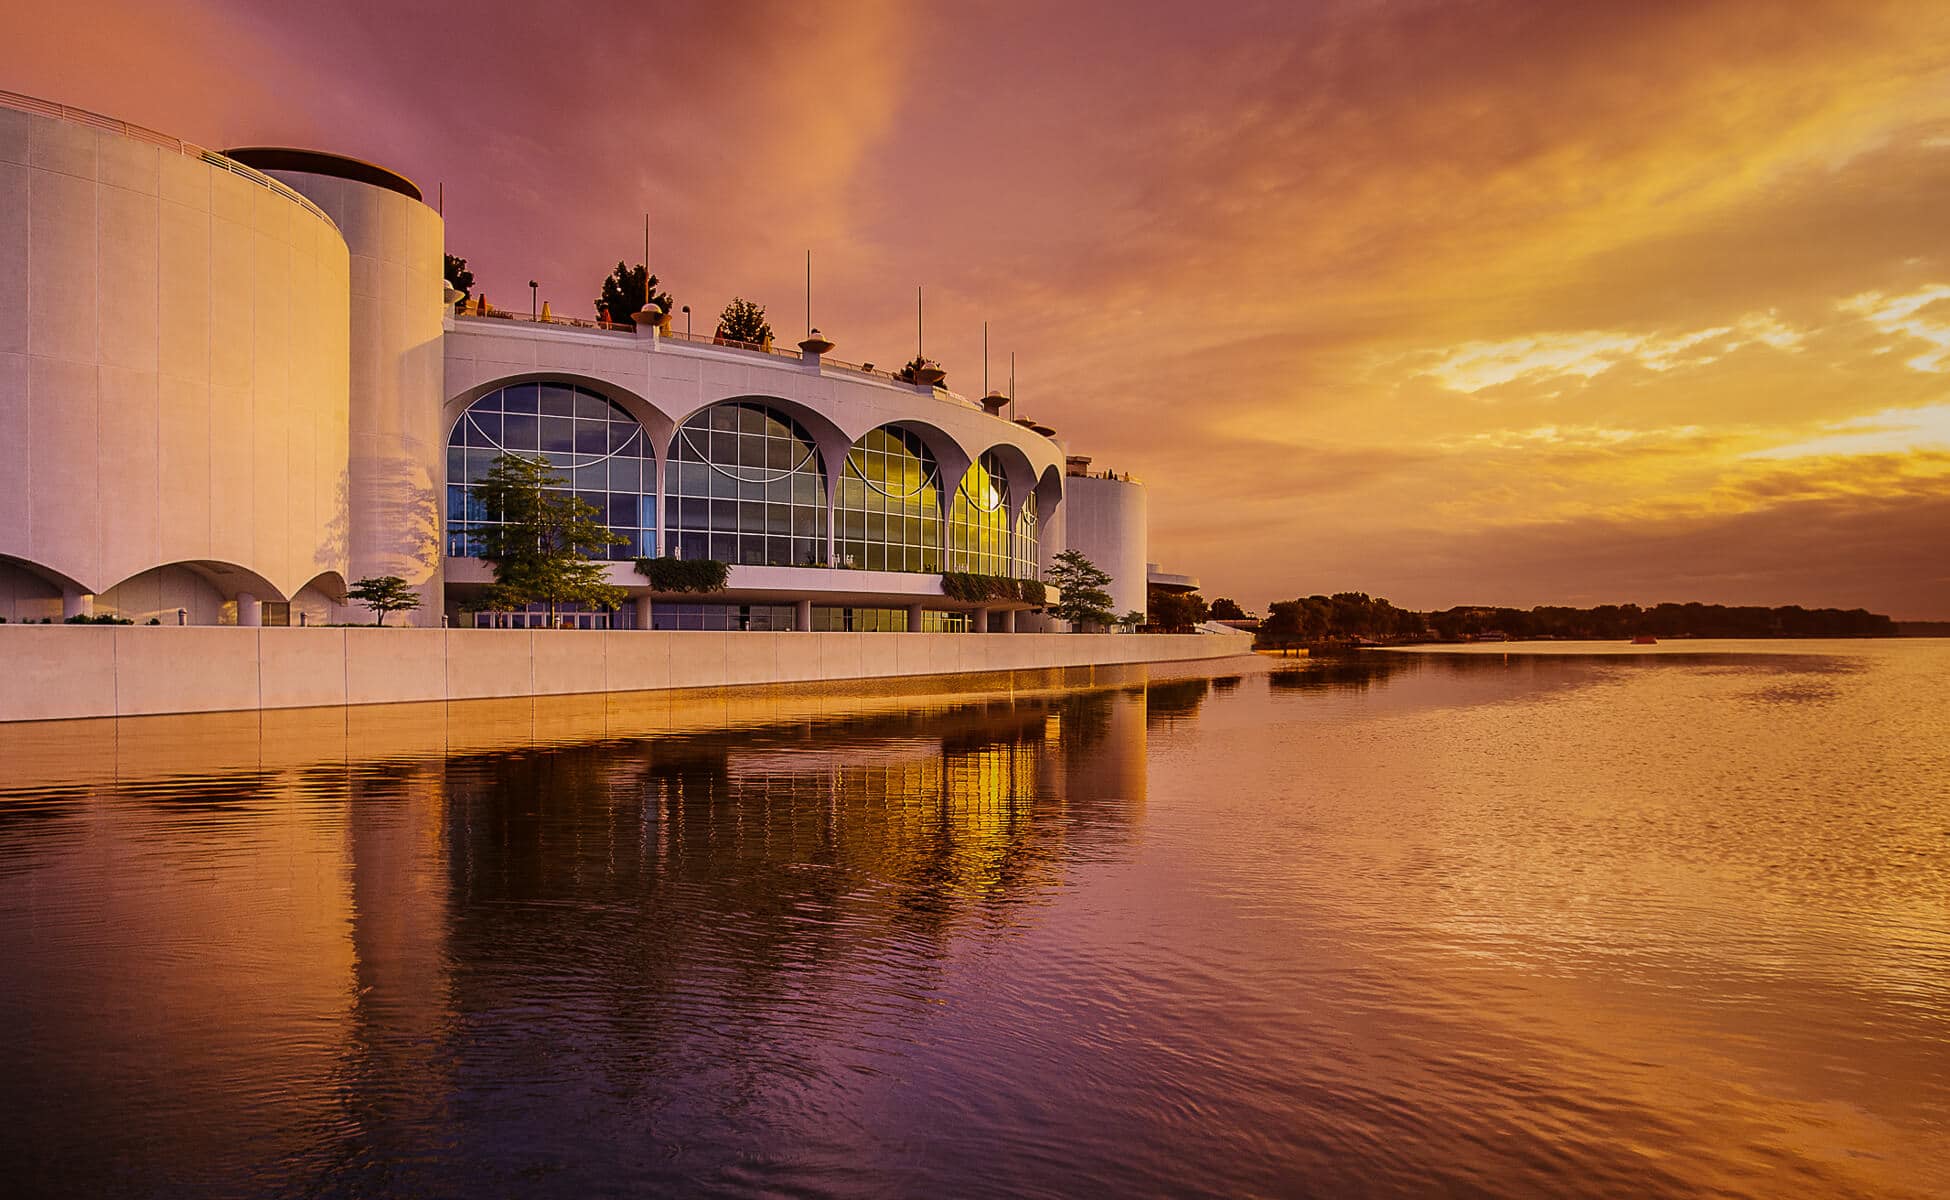 An artistic view of Monona Terrace from the lake at sunset